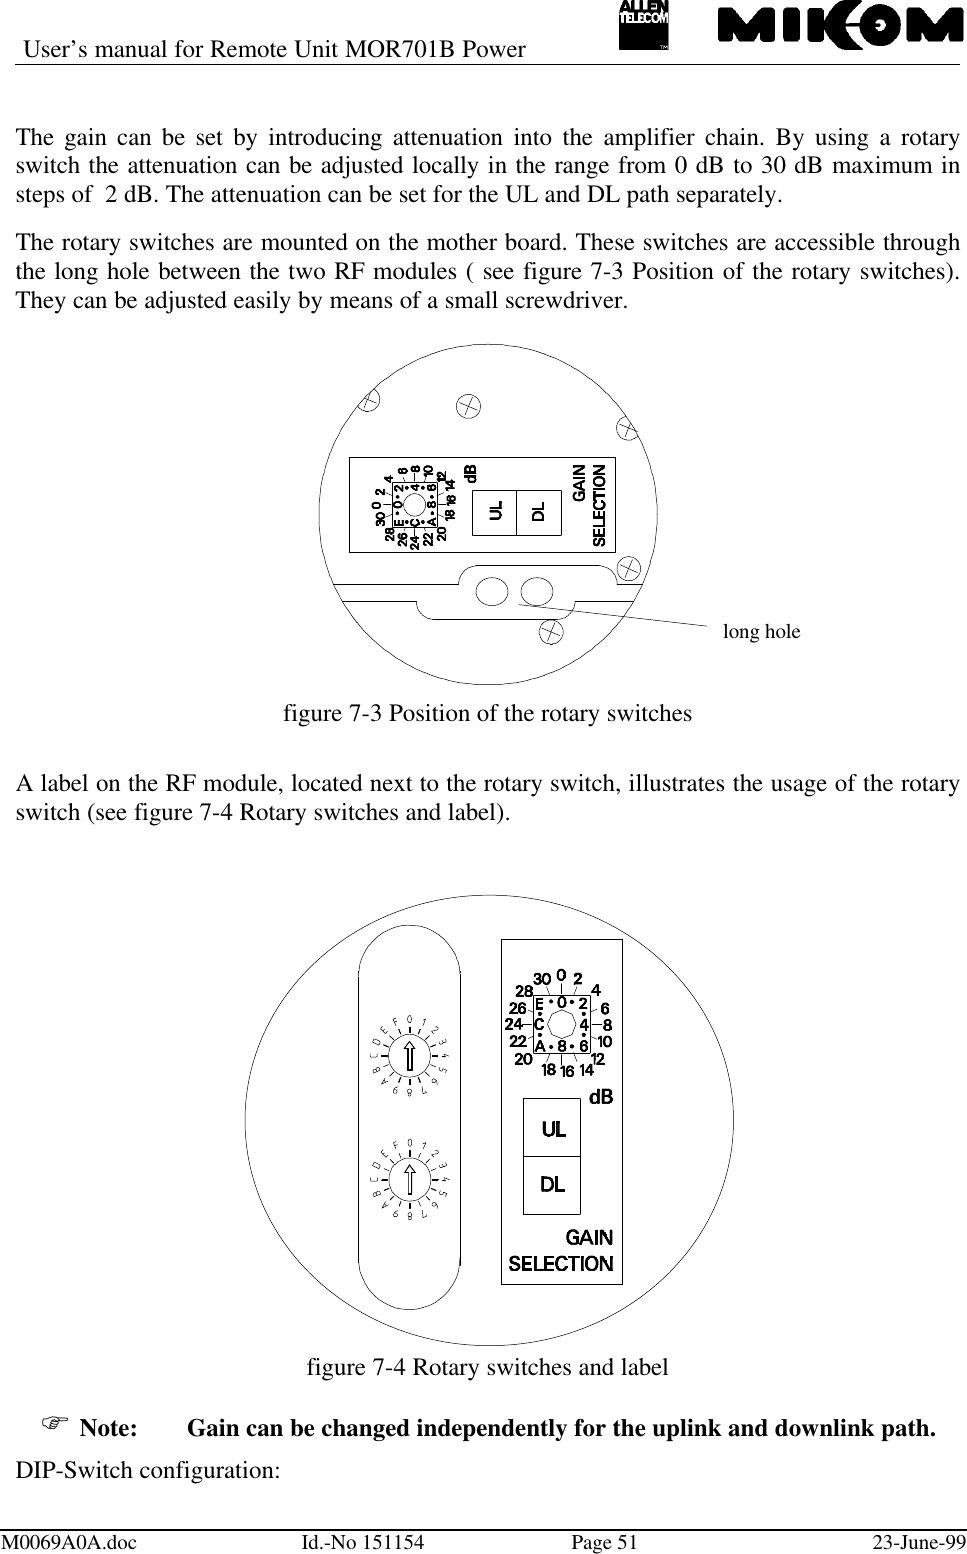 User’s manual for Remote Unit MOR701B PowerM0069A0A.doc Id.-No 151154 Page 51 23-June-99The gain can be set by introducing attenuation into the amplifier chain. By using a rotaryswitch the attenuation can be adjusted locally in the range from 0 dB to 30 dB maximum insteps of  2 dB. The attenuation can be set for the UL and DL path separately.The rotary switches are mounted on the mother board. These switches are accessible throughthe long hole between the two RF modules ( see figure 7-3 Position of the rotary switches).They can be adjusted easily by means of a small screwdriver.figure 7-3 Position of the rotary switchesA label on the RF module, located next to the rotary switch, illustrates the usage of the rotaryswitch (see figure 7-4 Rotary switches and label).figure 7-4 Rotary switches and labelF Note: Gain can be changed independently for the uplink and downlink path.DIP-Switch configuration:long hole